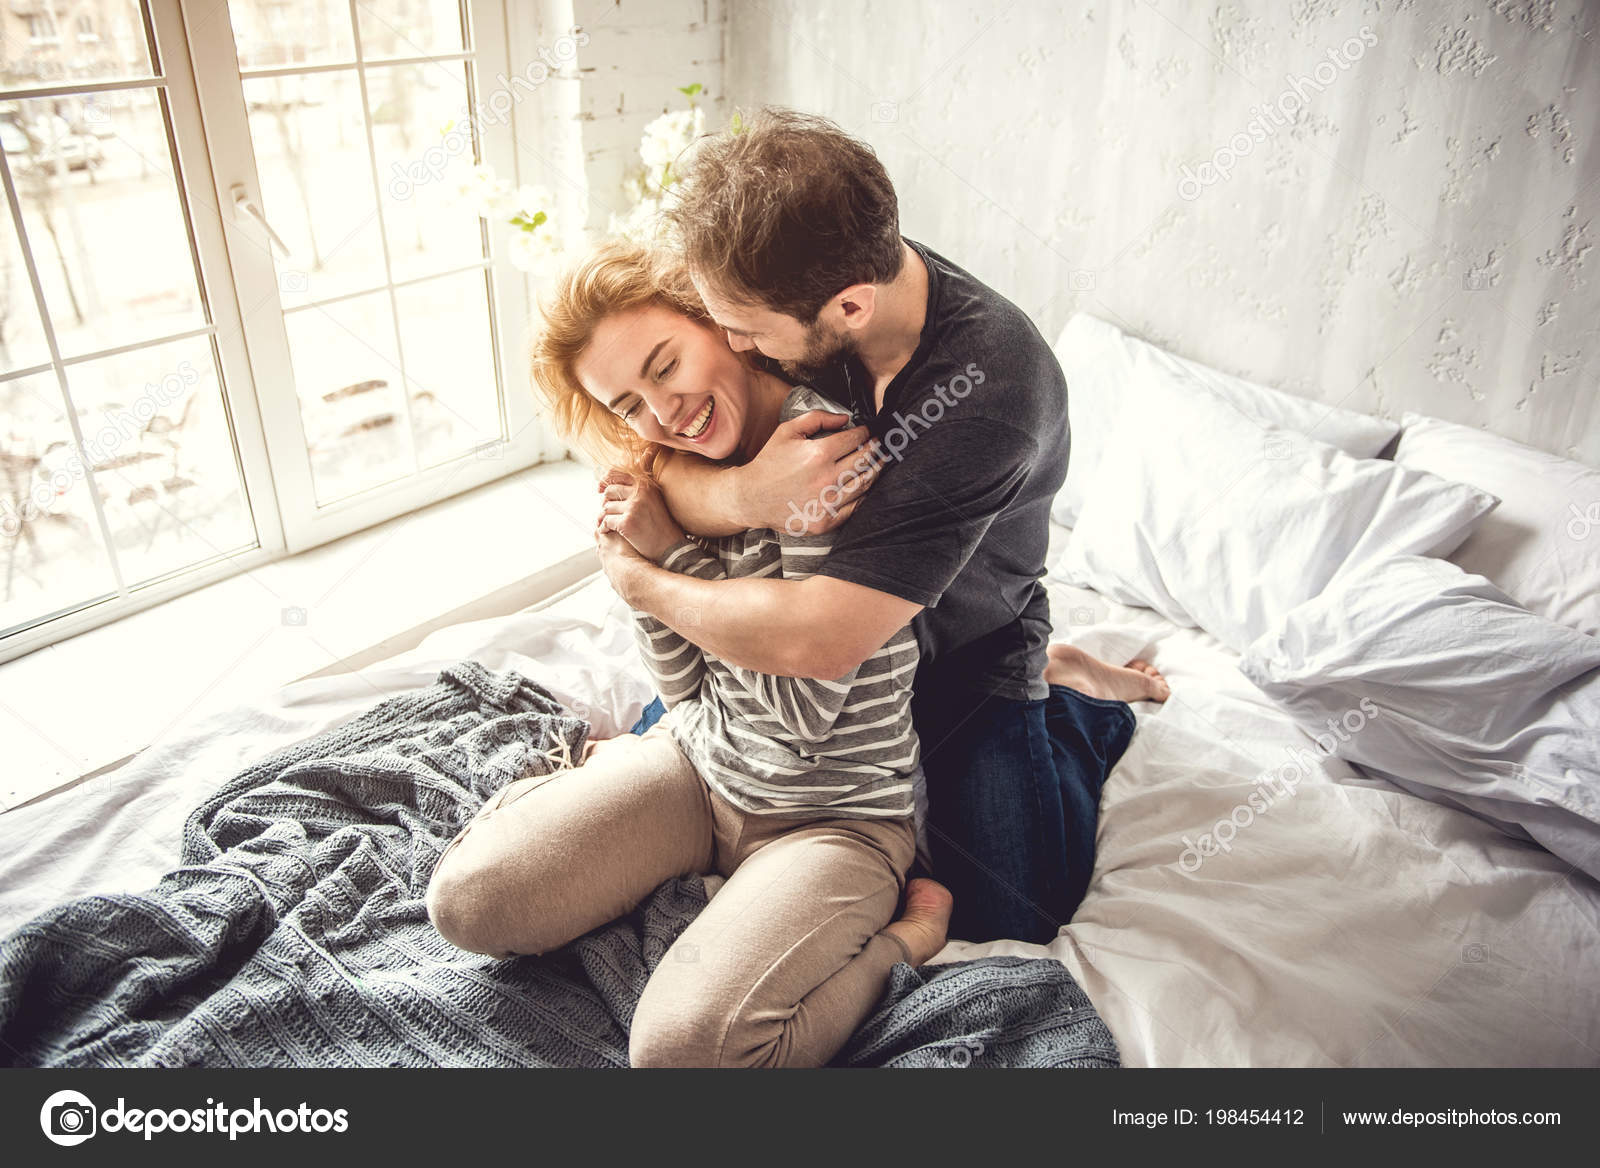 Man is hugging tightly beloved woman - Stock Photo, Image. 